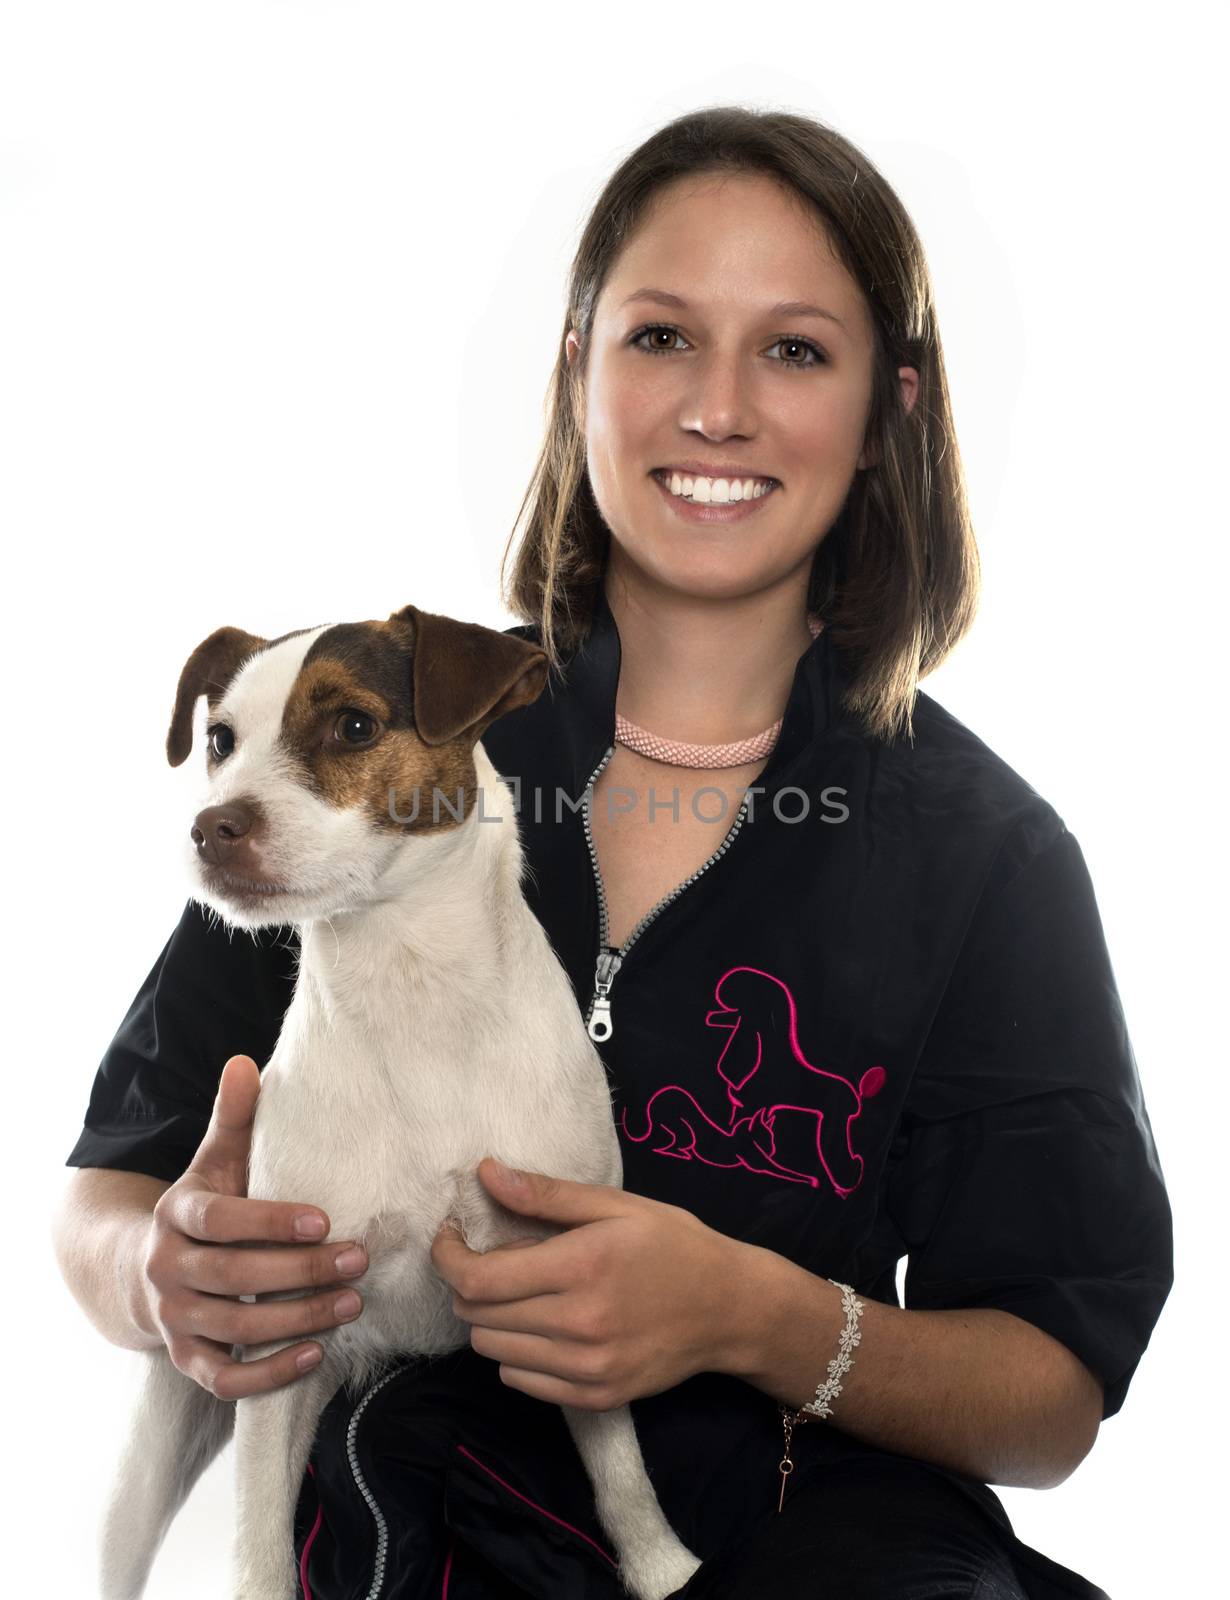 jack russel terrier and woman in front of white background